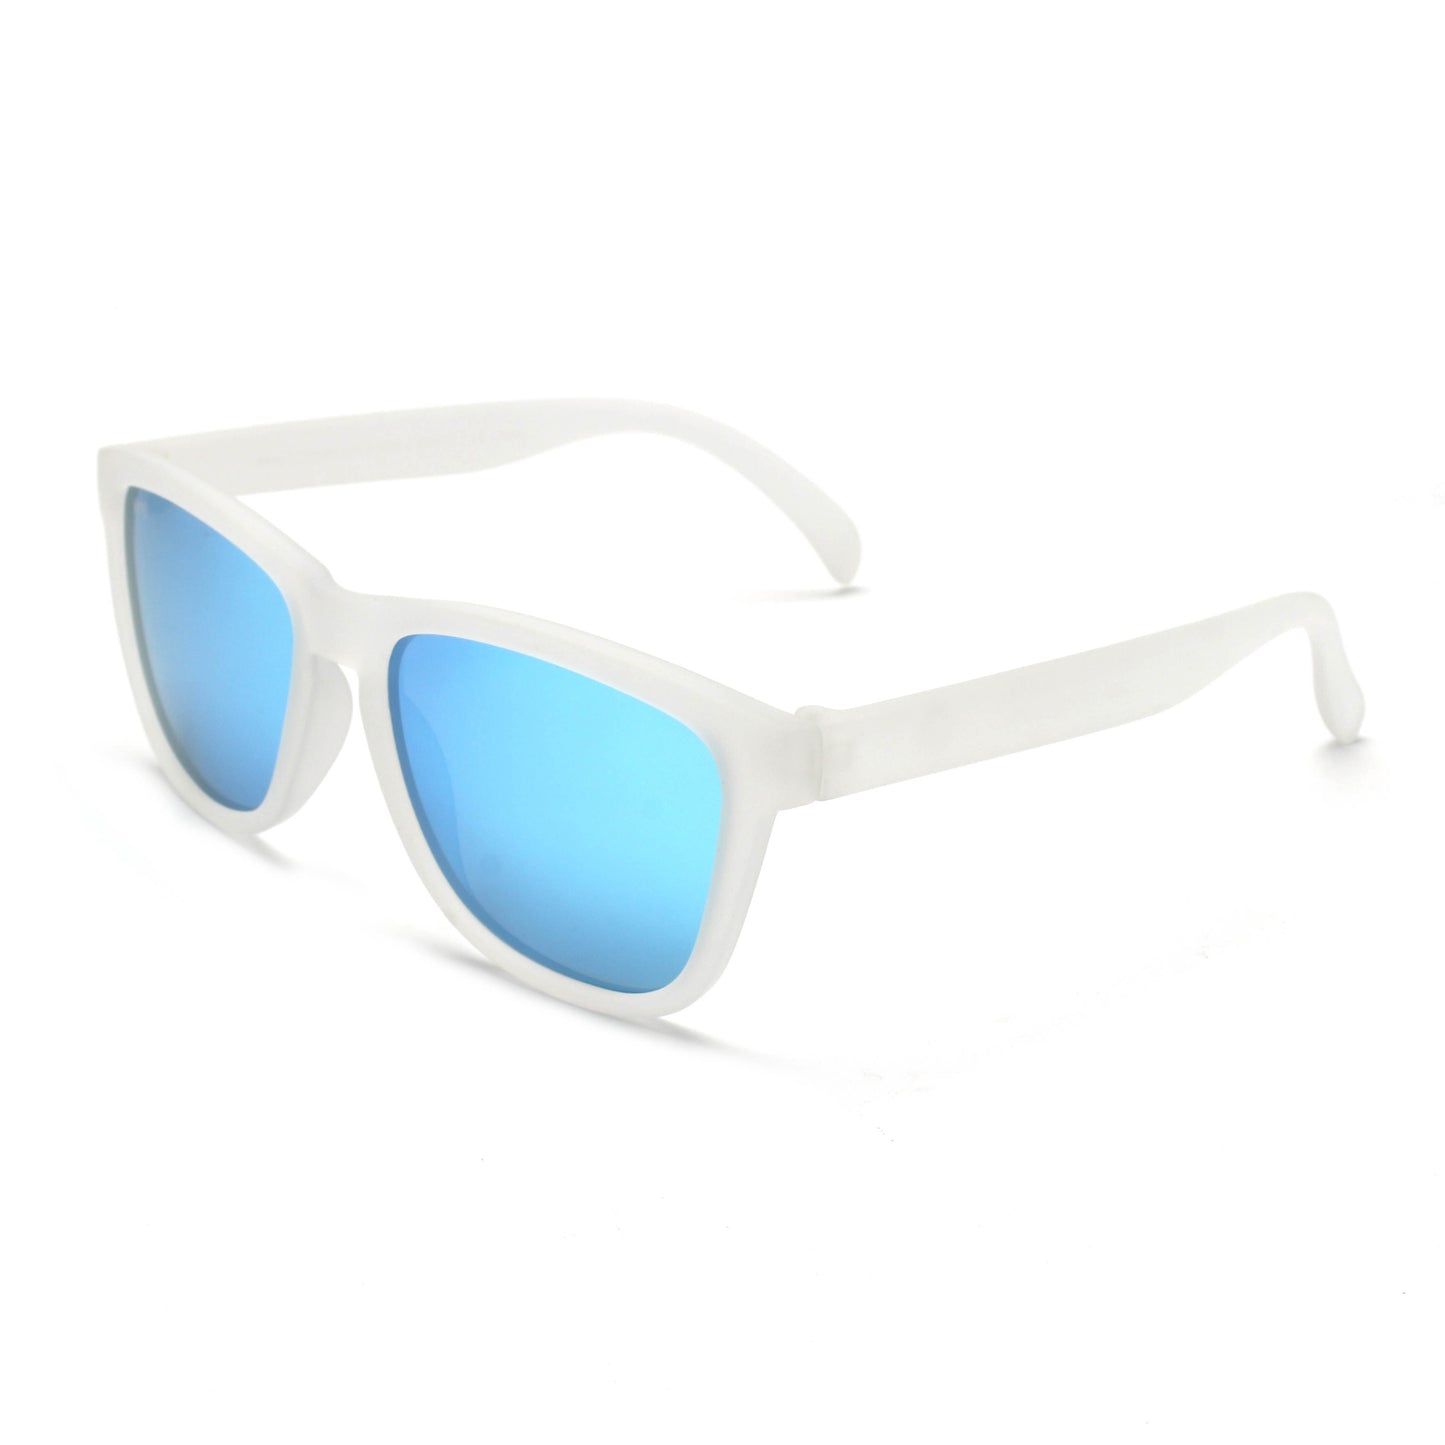 Side view of the UV400 Polarized Blue View Heny Sunglasses